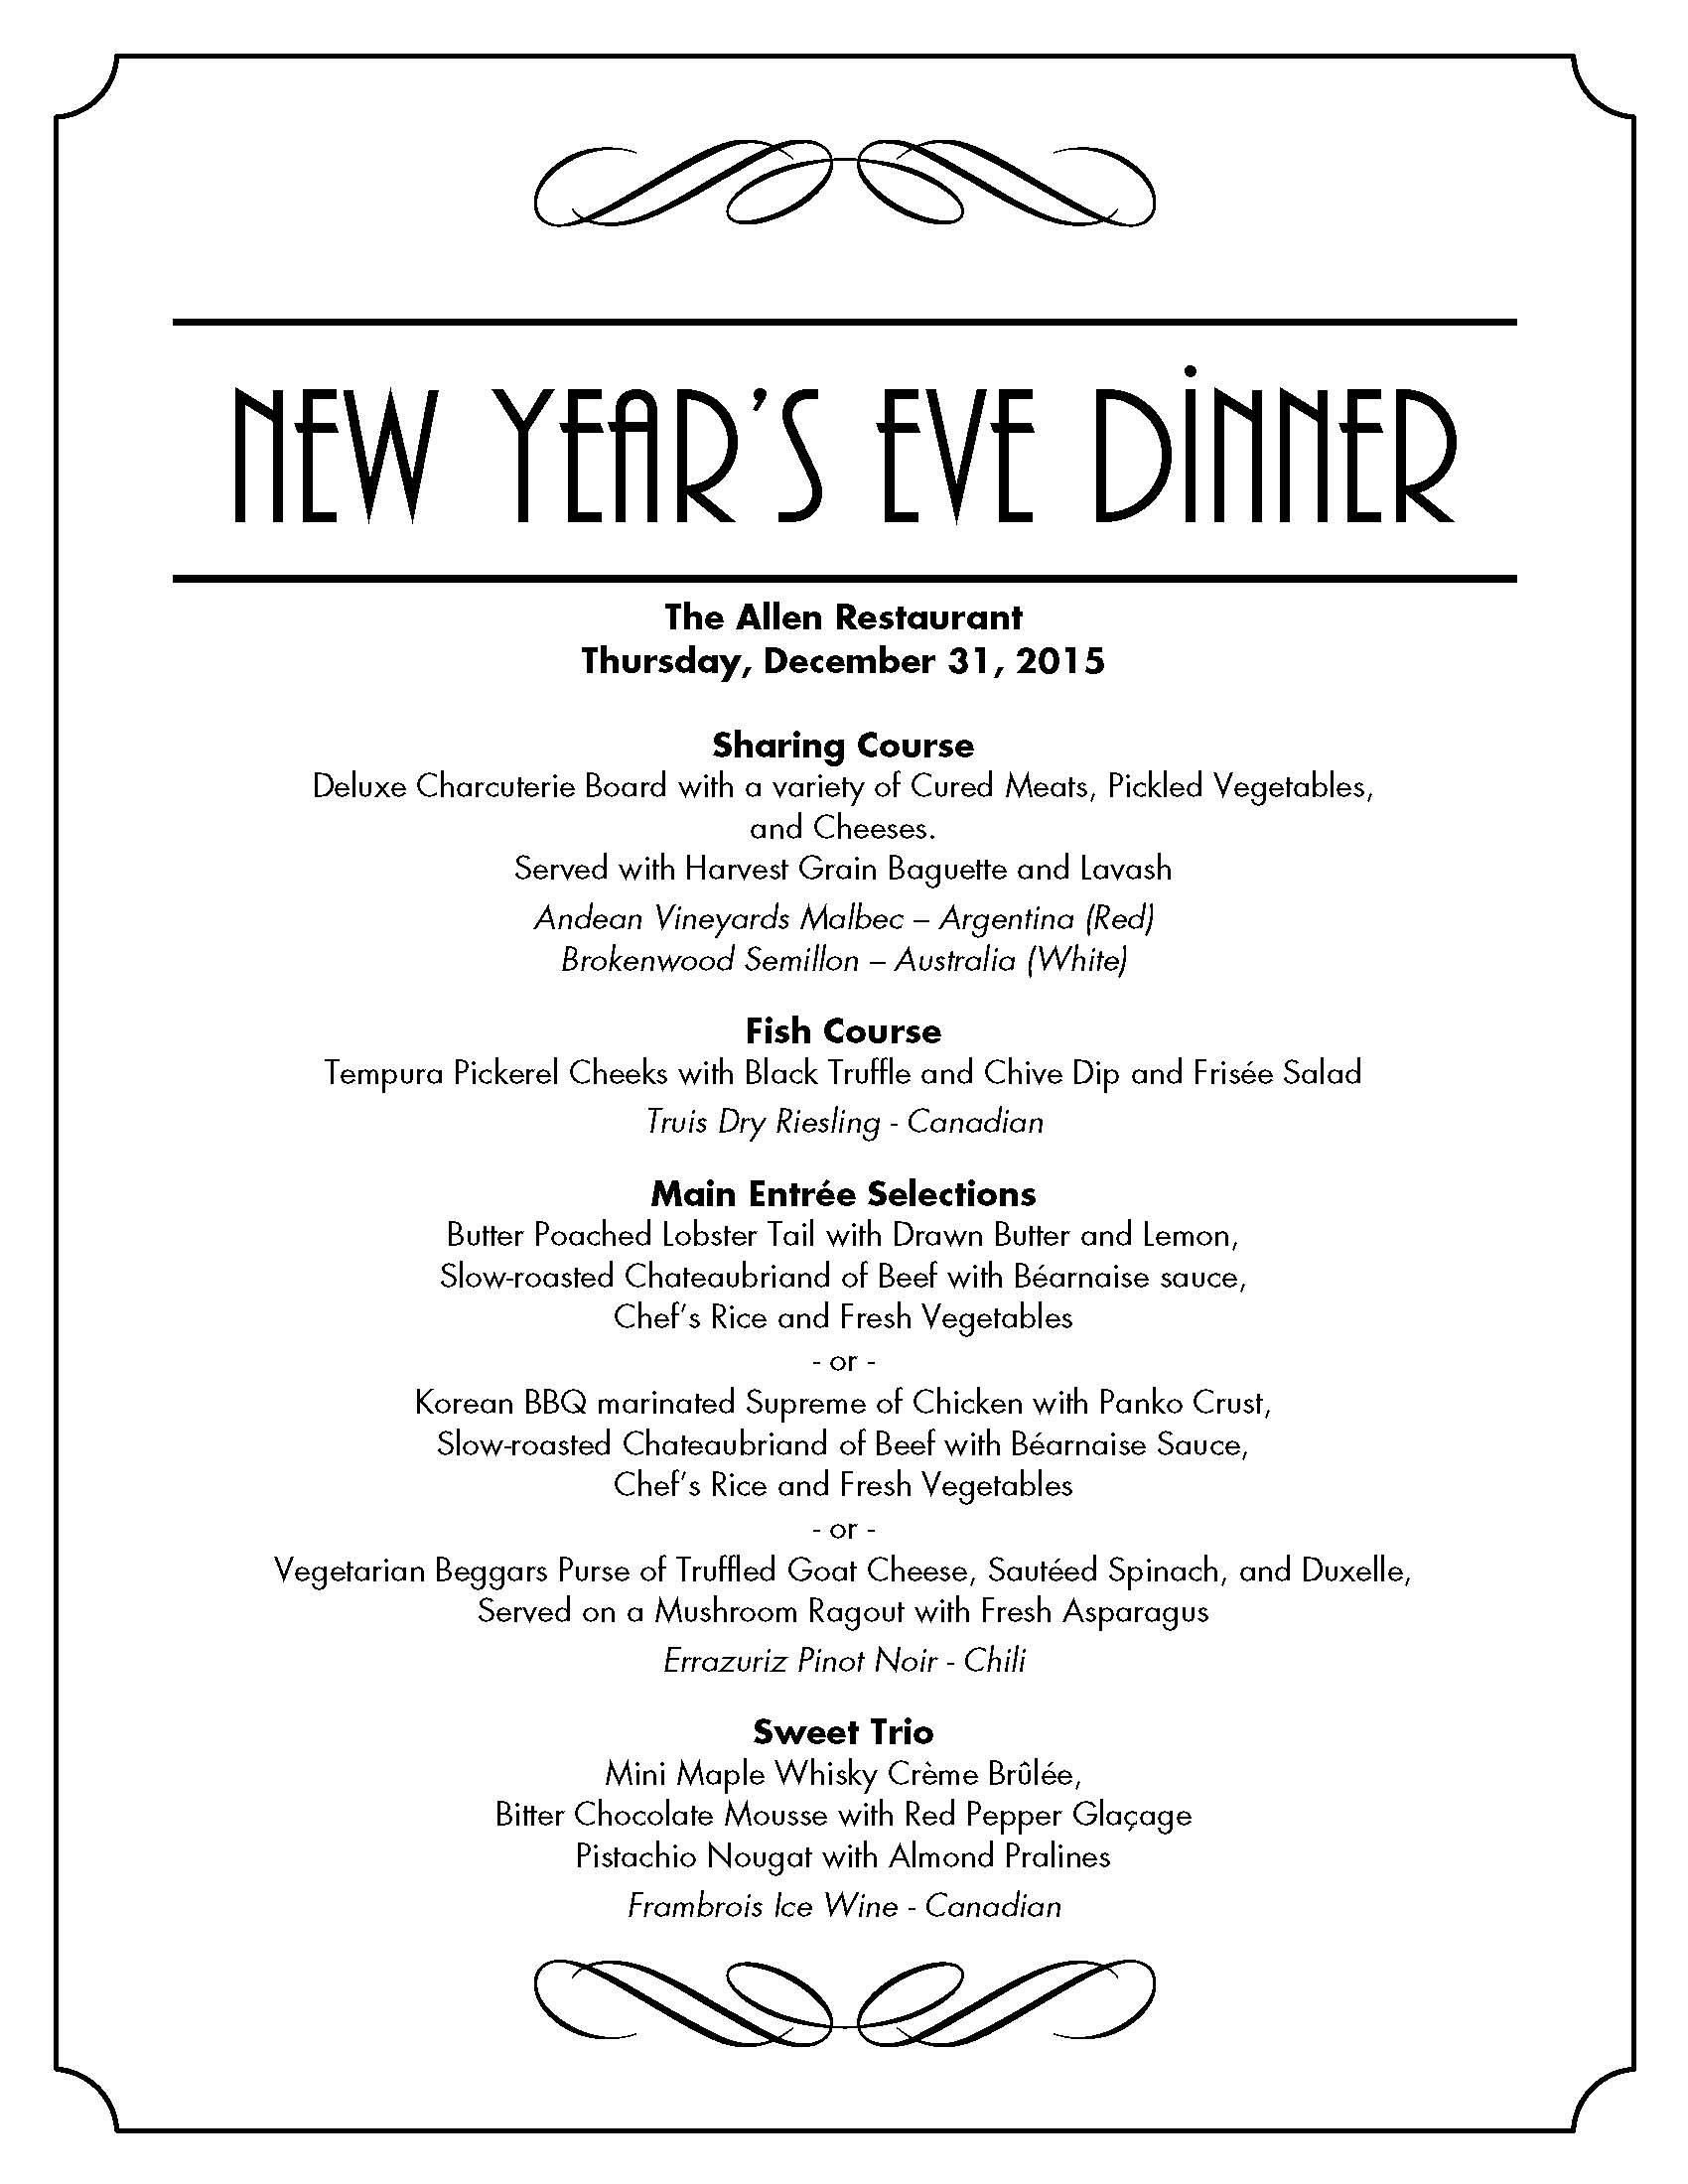 New Year Day Dinner Menu
 New Years Eve Dinner at The Allen Restaurant